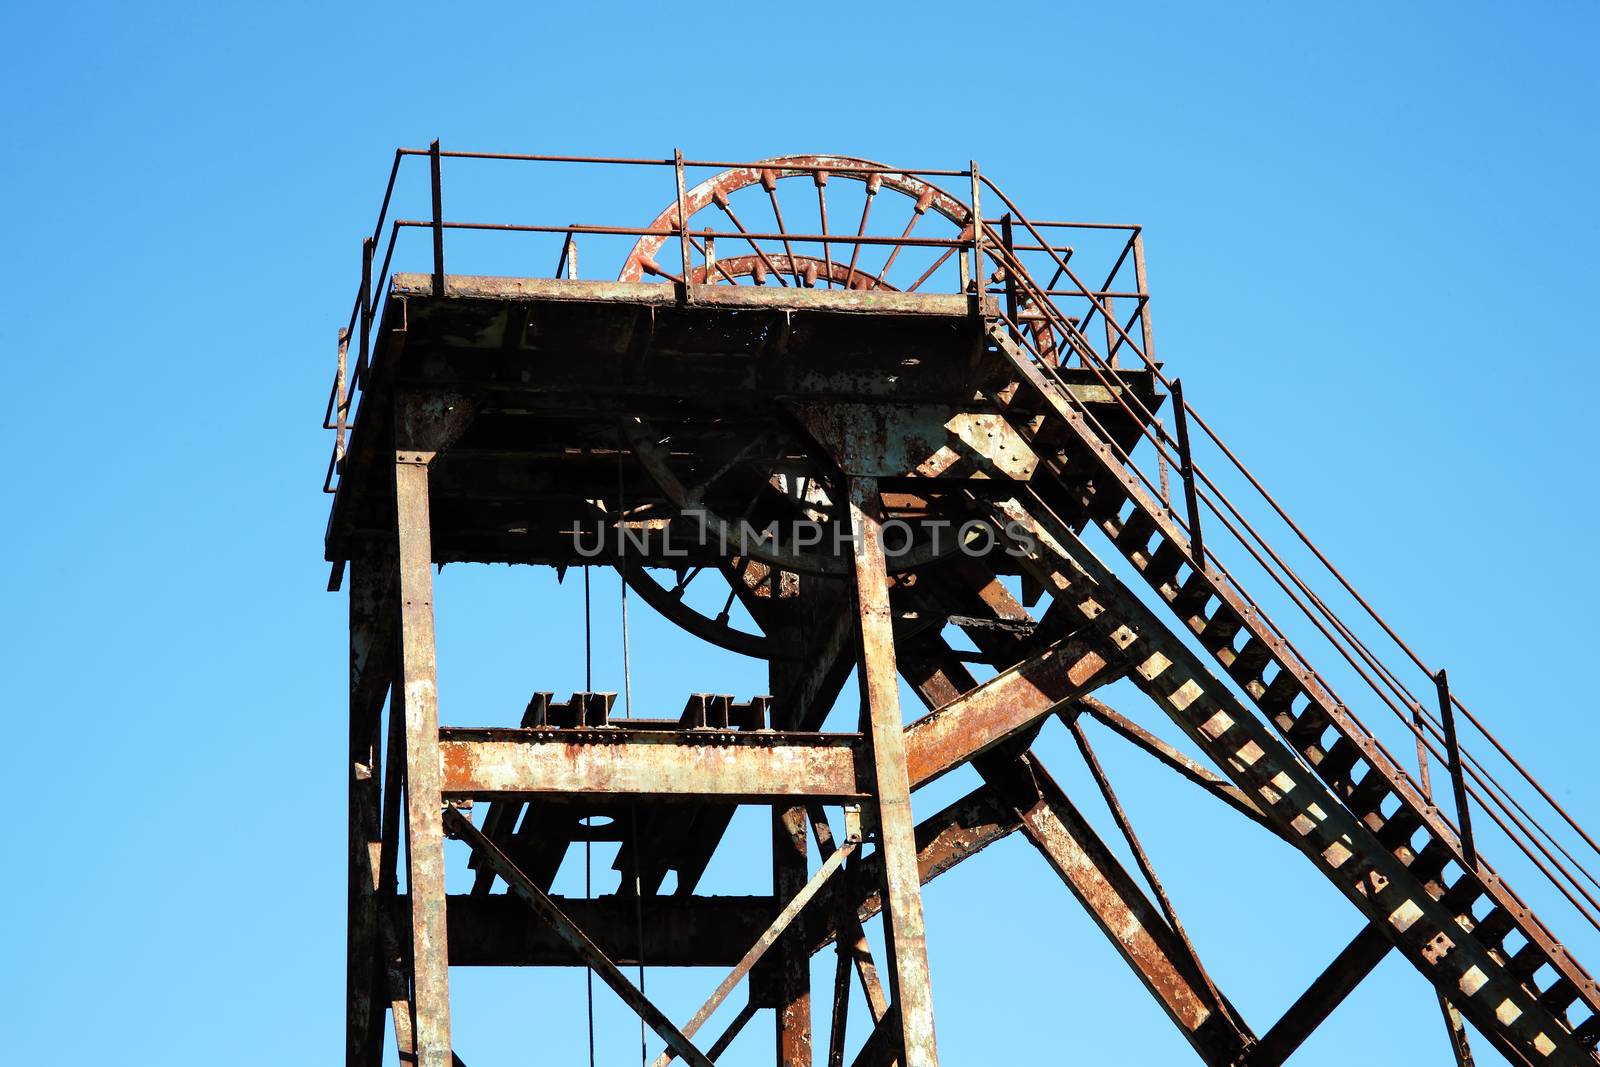 Hoist wheel which was used at a redundent coal mine shaft before energy mining came to an end due to environment global warming concerns stock photo